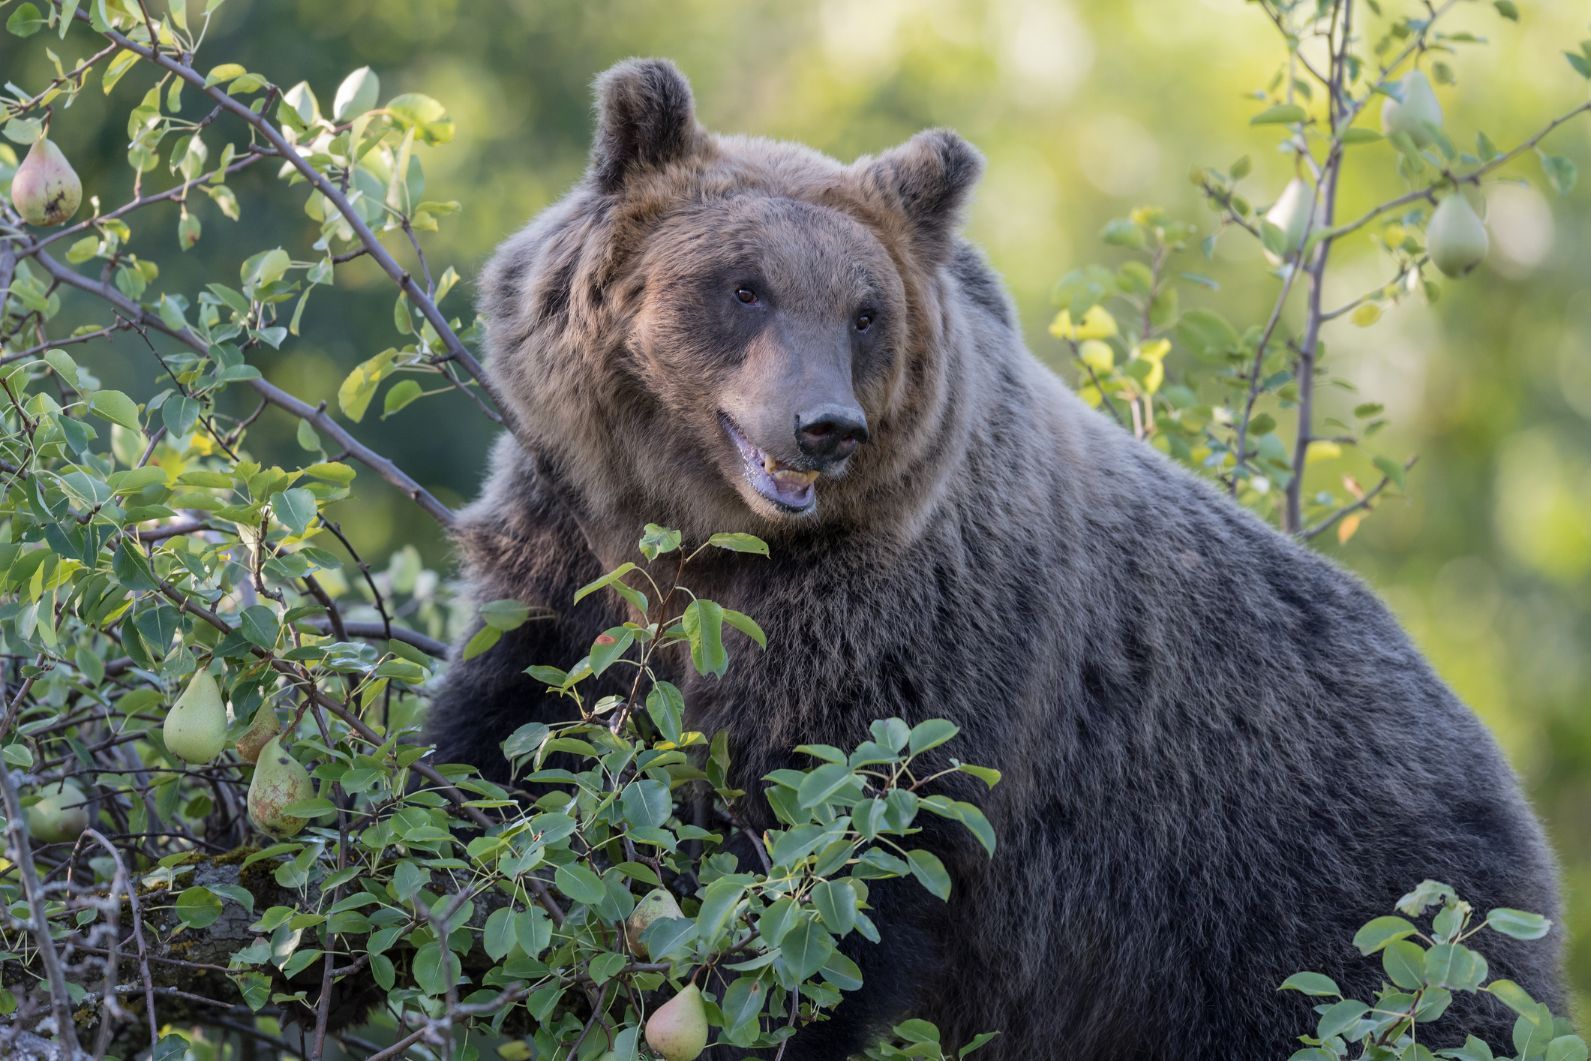 A Marsican brown bear, in the Central Apennines, about to pluck pears from a tree.